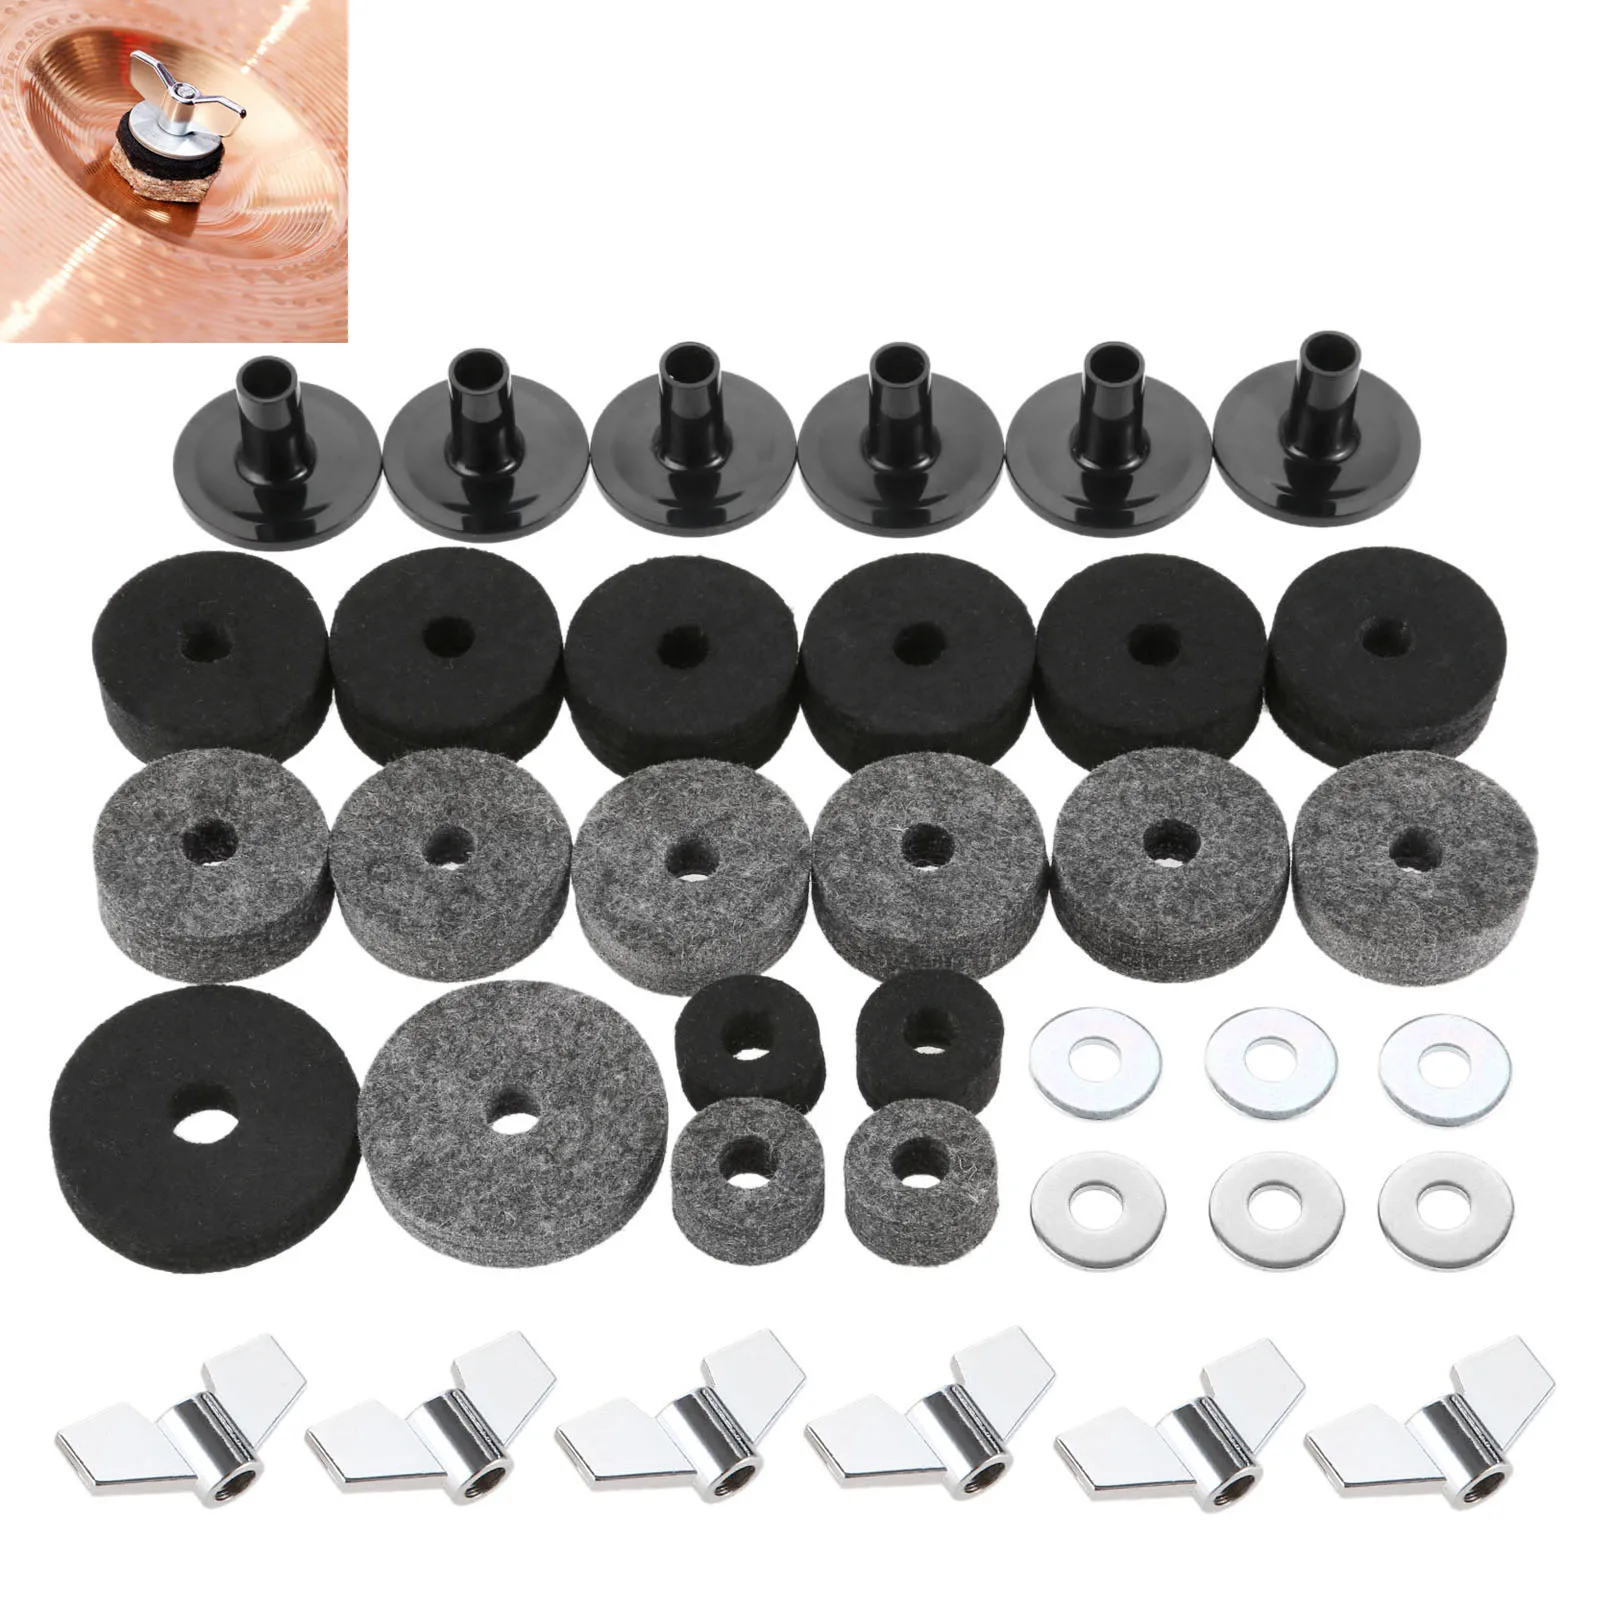 Washer Cymbal Replacement Accessories Sleeves and Base Wing Nuts Replacement for Drum Set Cymbal Felts Hi-Hat Clutch Felt Hi Hat Cup Felt Cymbal Sleeves with Base Wing Nuts （23 Pieces 